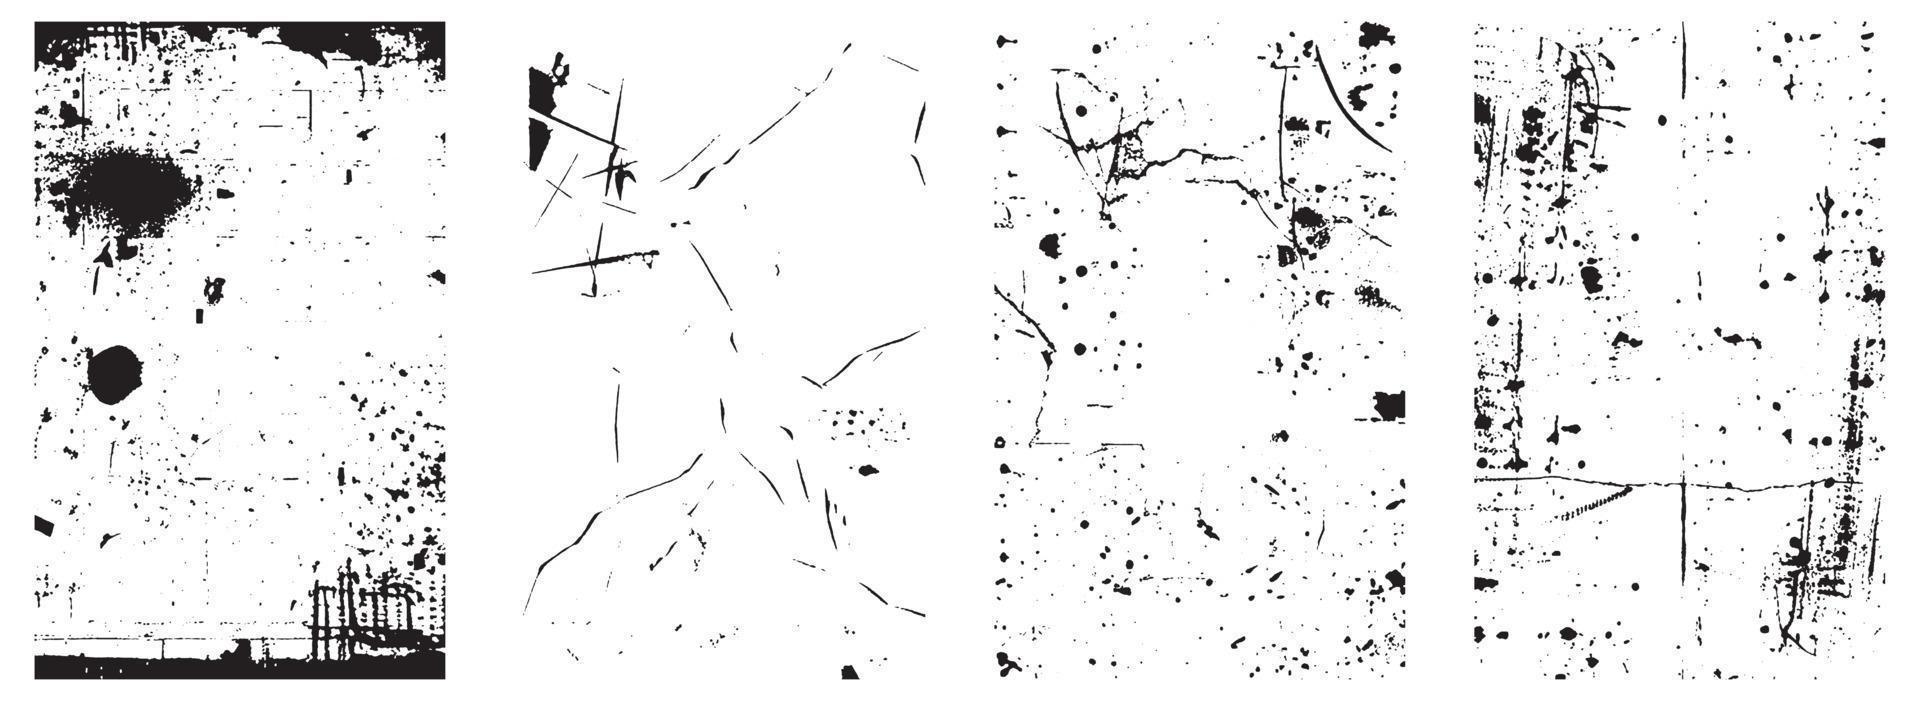 Set of Grunge Distress Vector Textures. Black and White Backgrounds with Splatter, Scratch and Stain Effects. EPS 10.